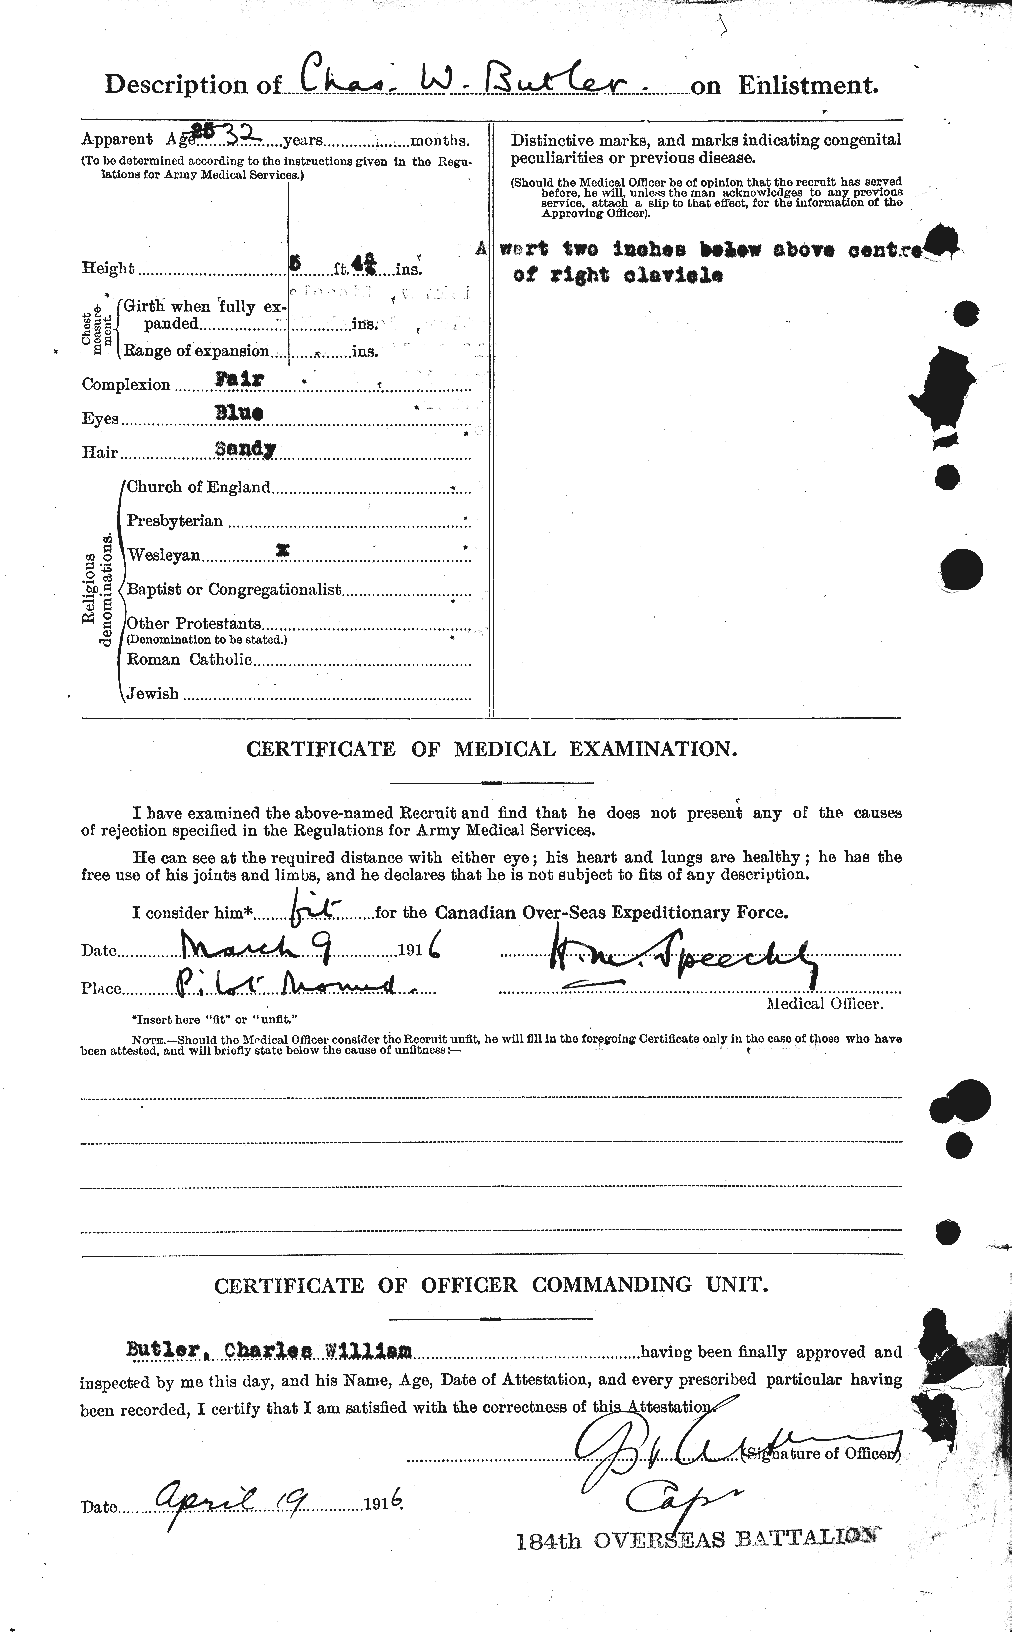 Personnel Records of the First World War - CEF 275833b